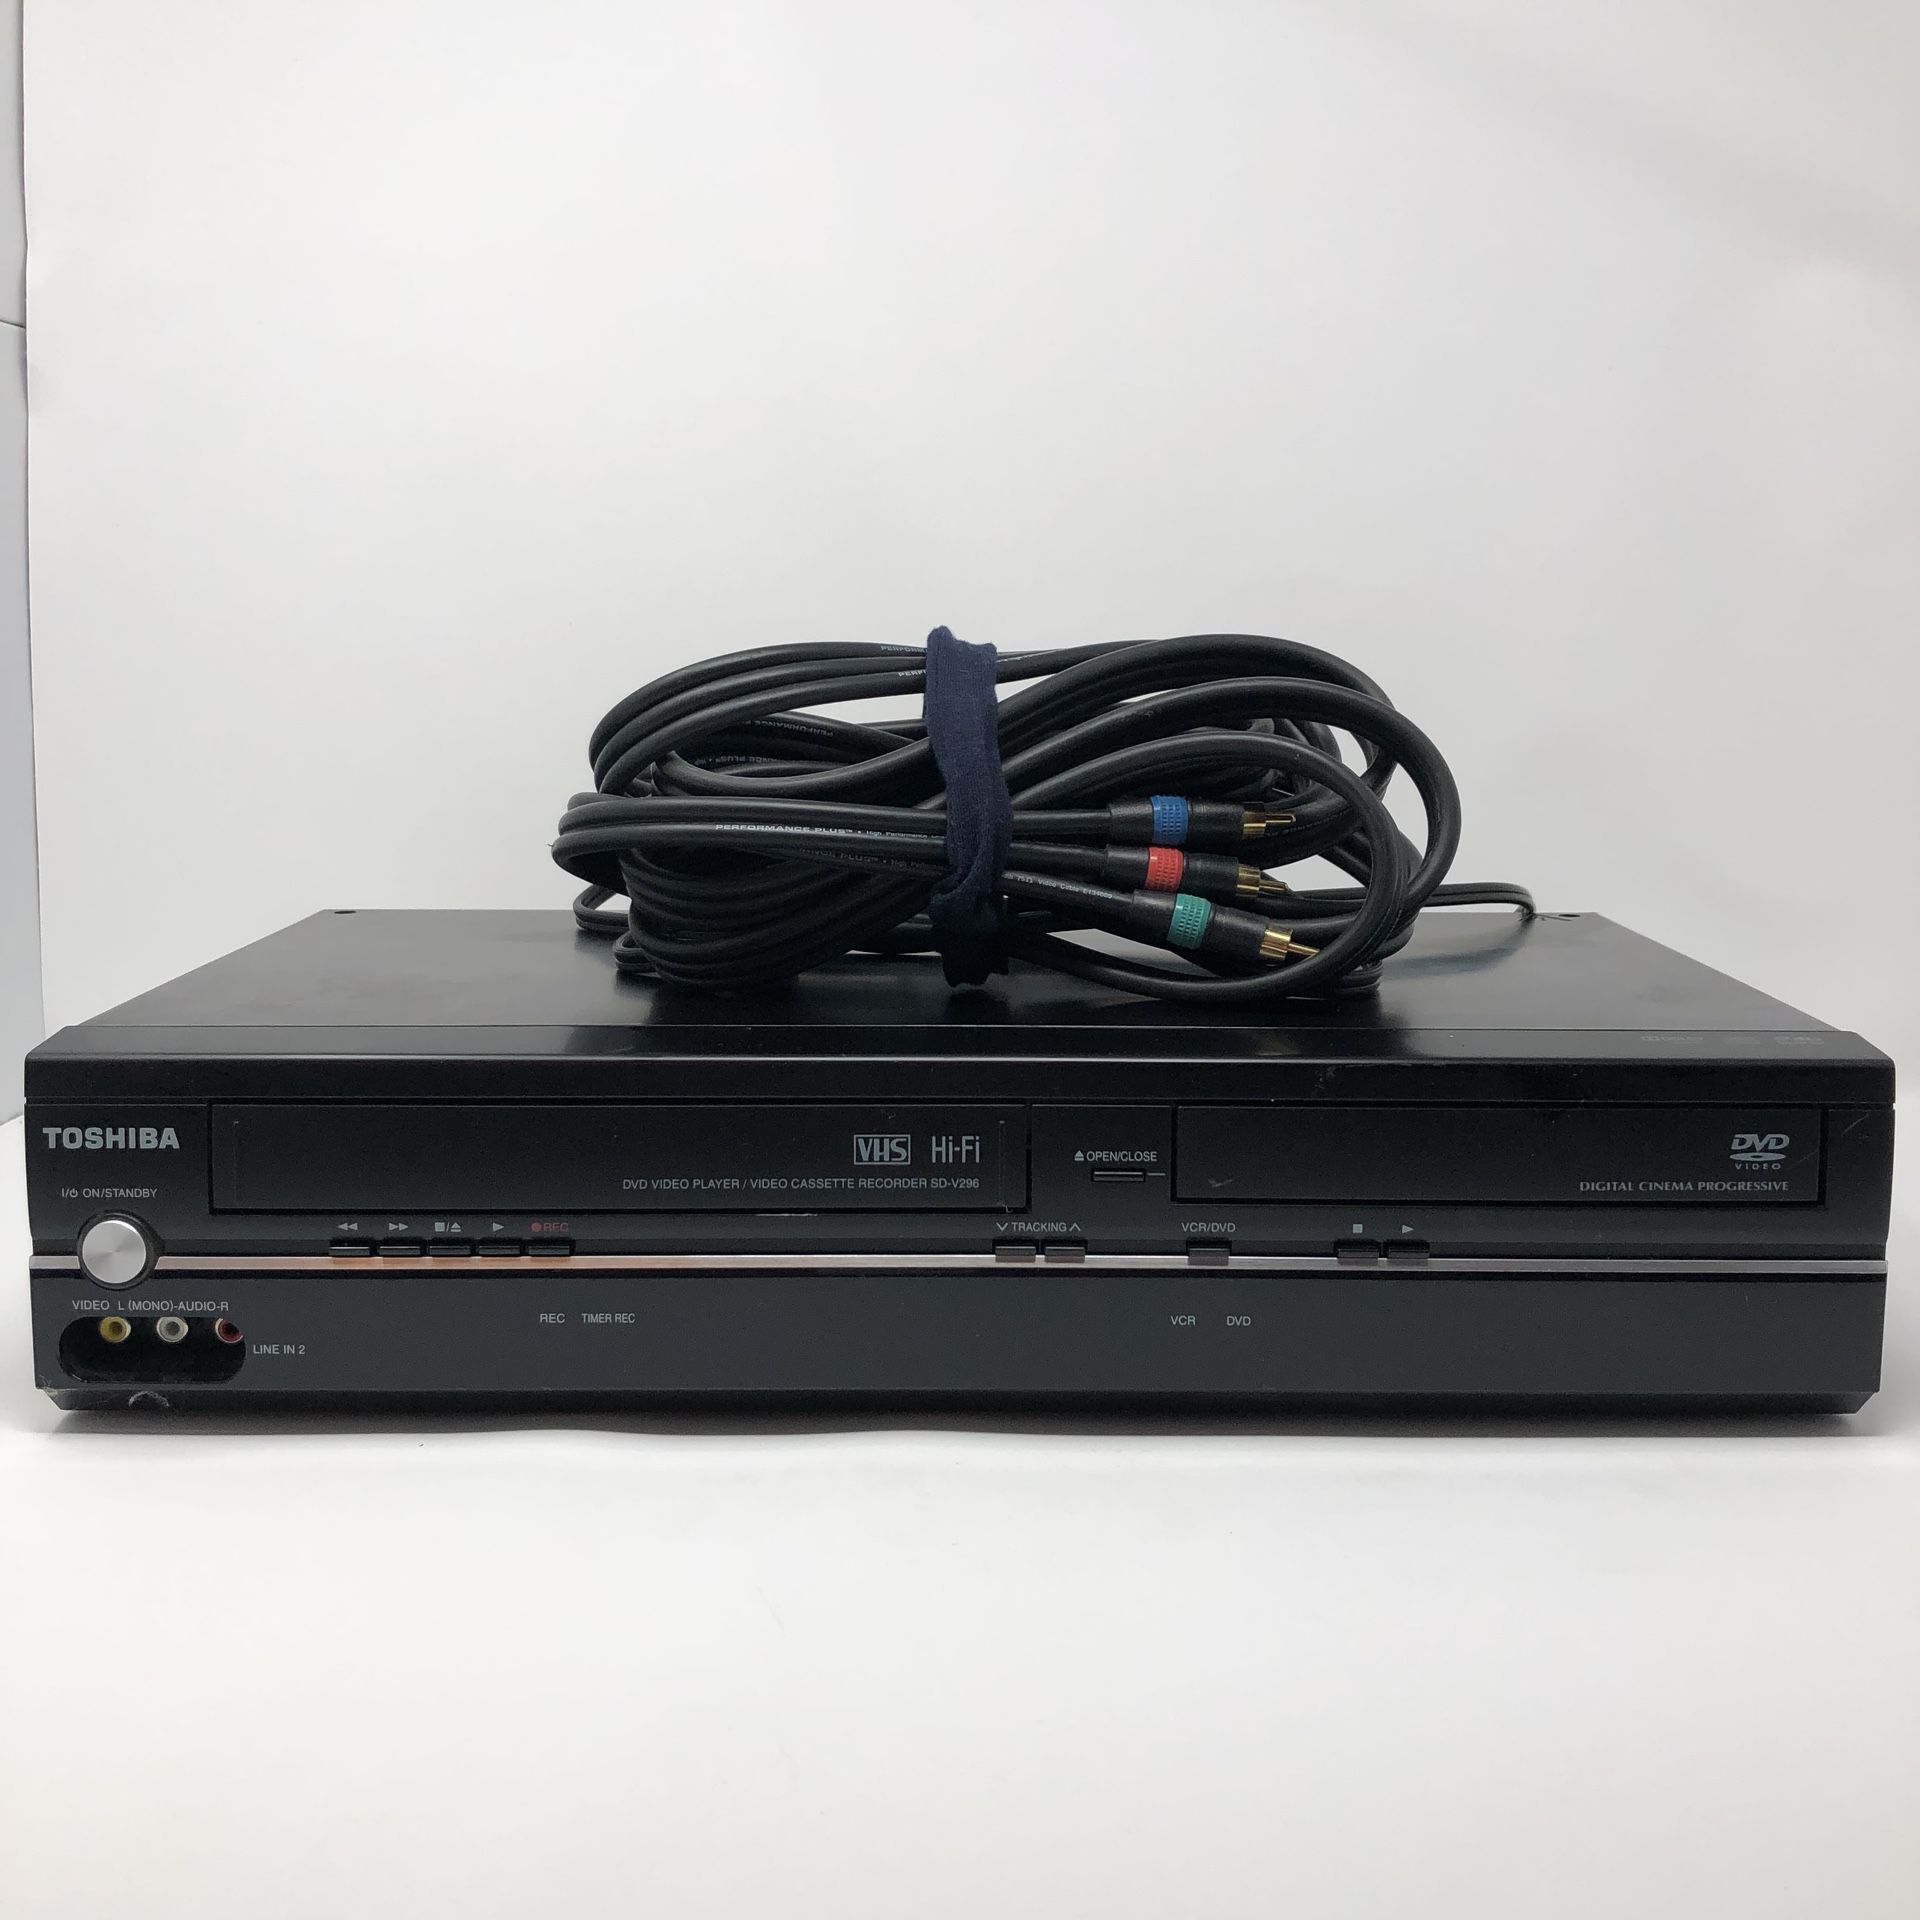 Toshiba SD-V296 Tunerless DVD VCR PLAYER with MONSTER CABLES included